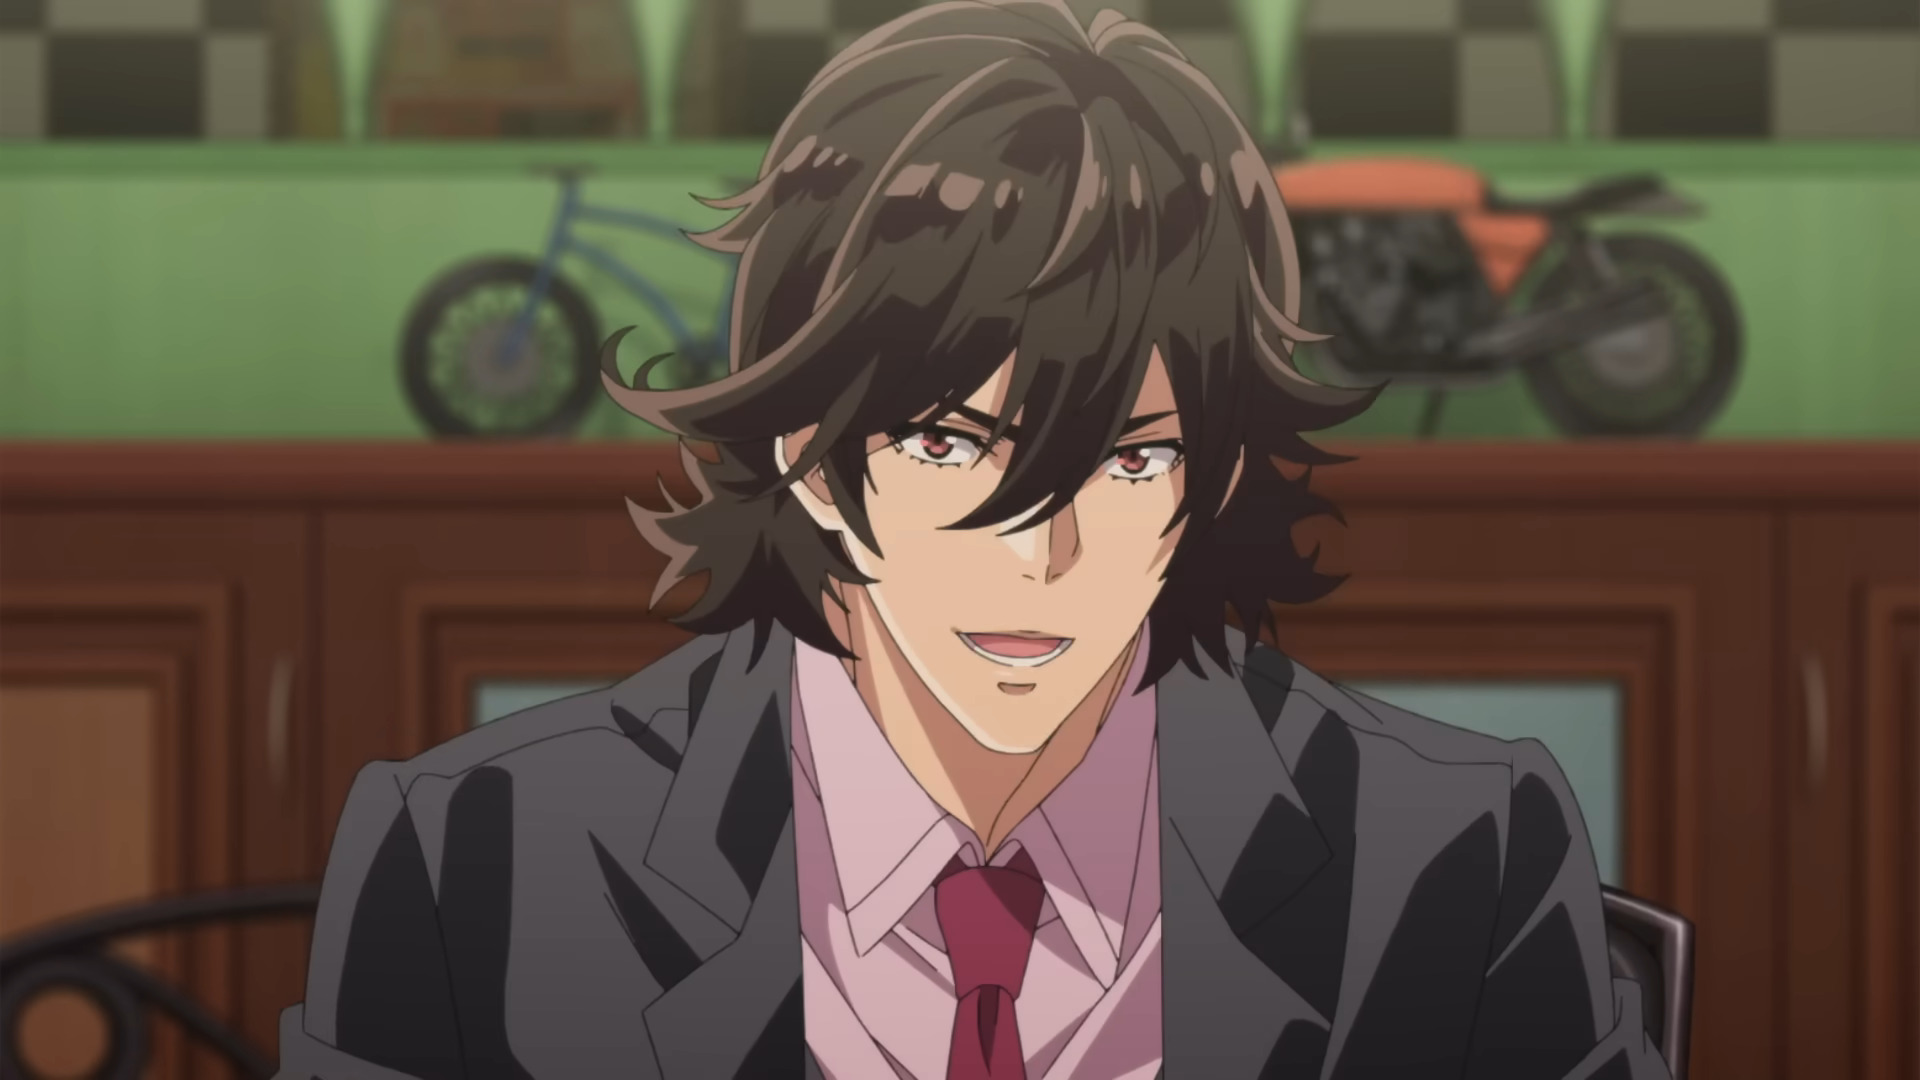 New images from the Kamen Rider W anime - Fuuto Tantei. We can see Philip,  Shotaro, Ryu and Akiko along with Tokime - the former Joker…